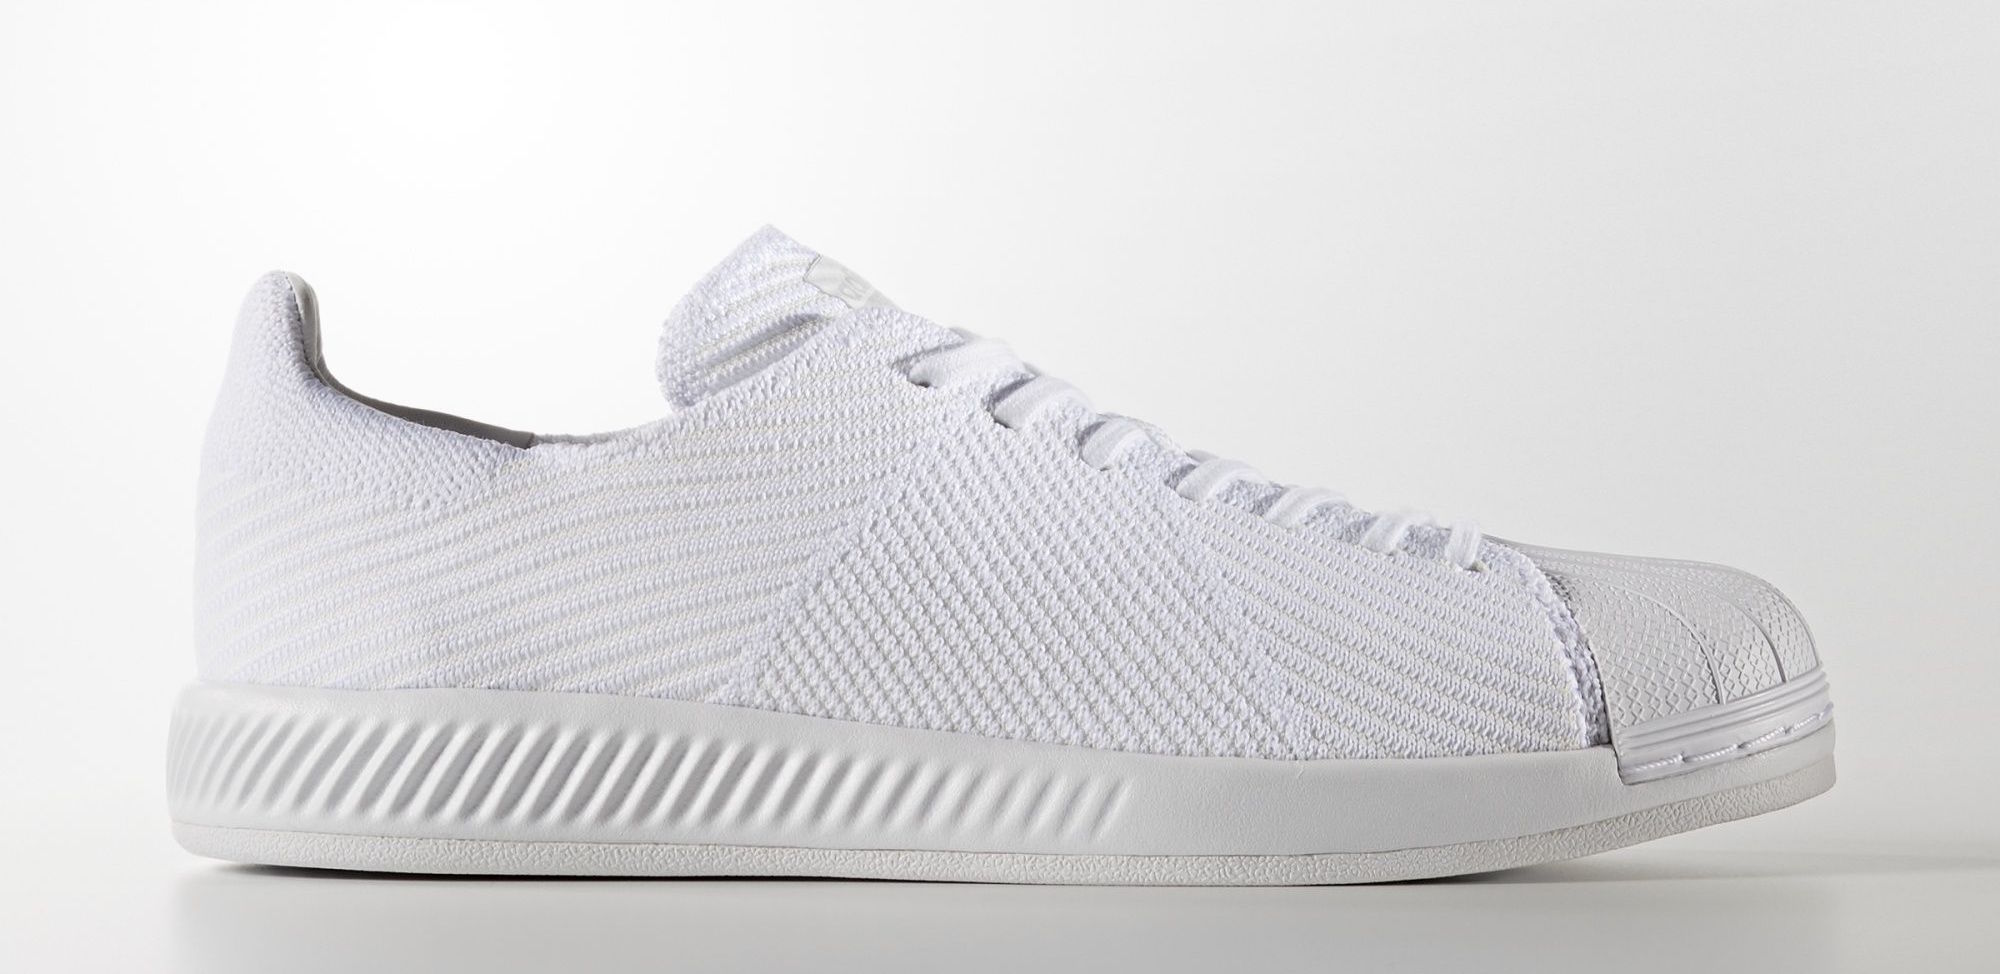 The adidas Superstar to Feature Bounce 